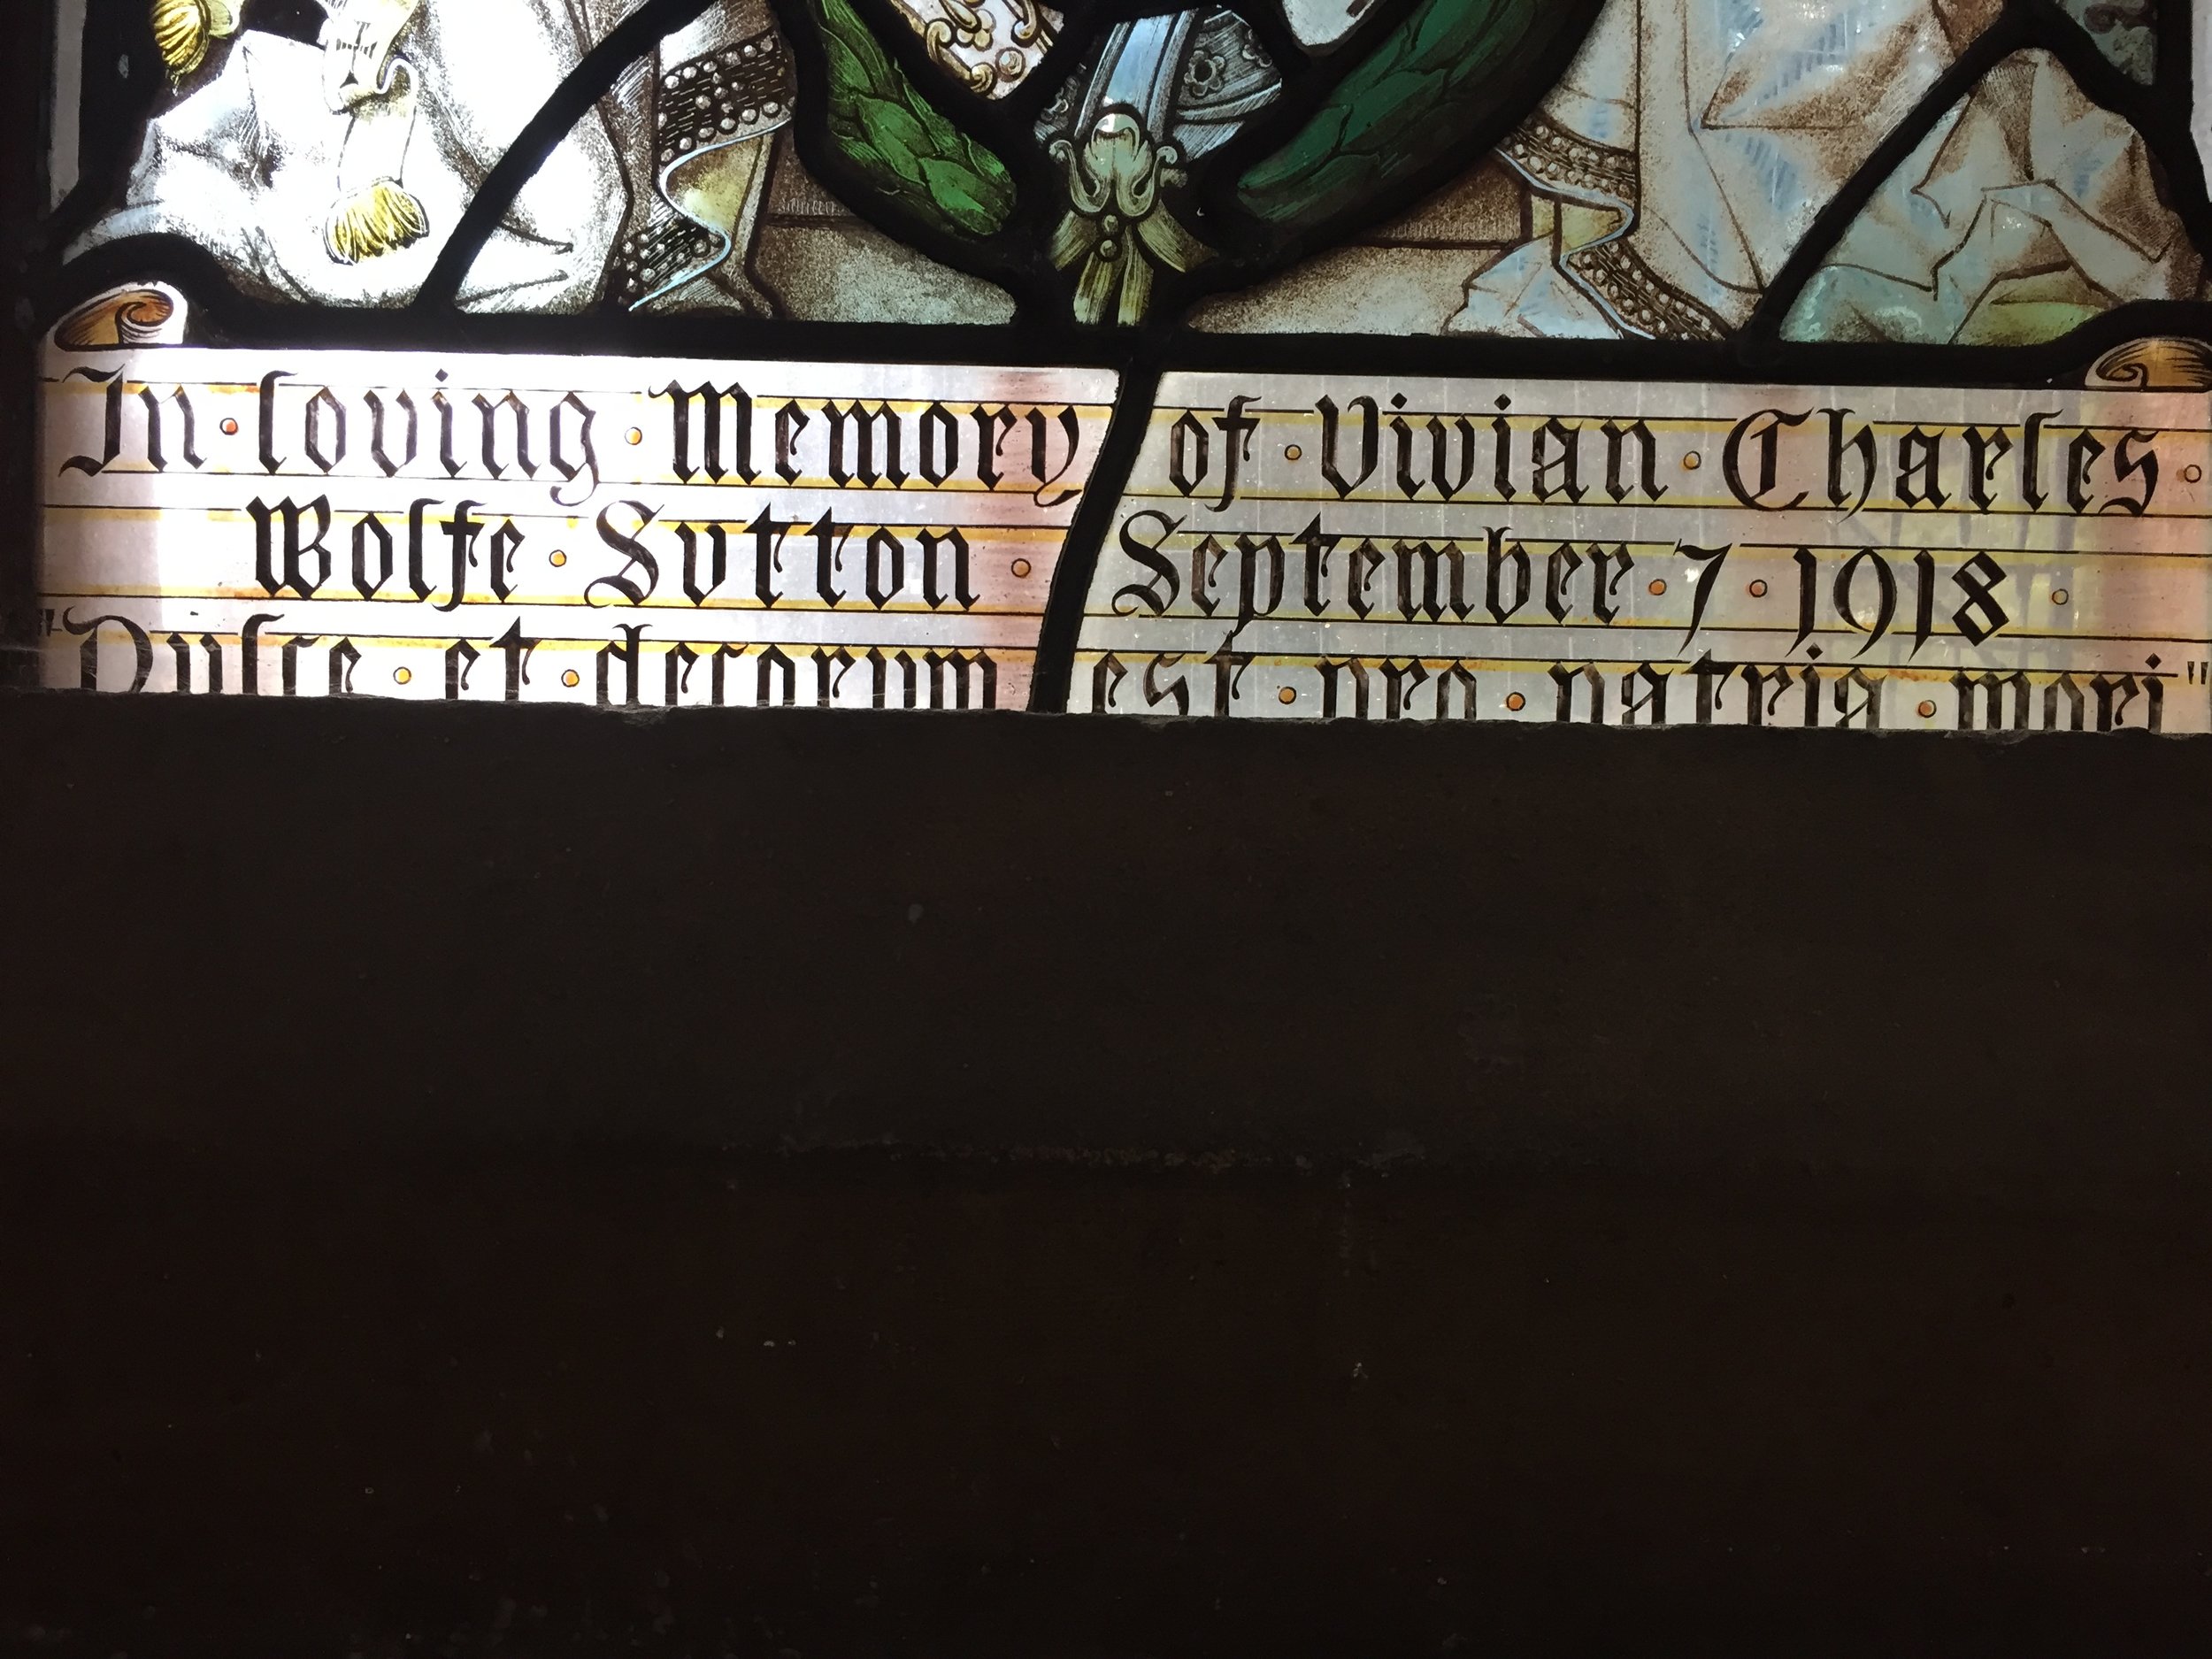 Stained glass window at St Johns sidcup dedicated to Sutton (inscription close up).png